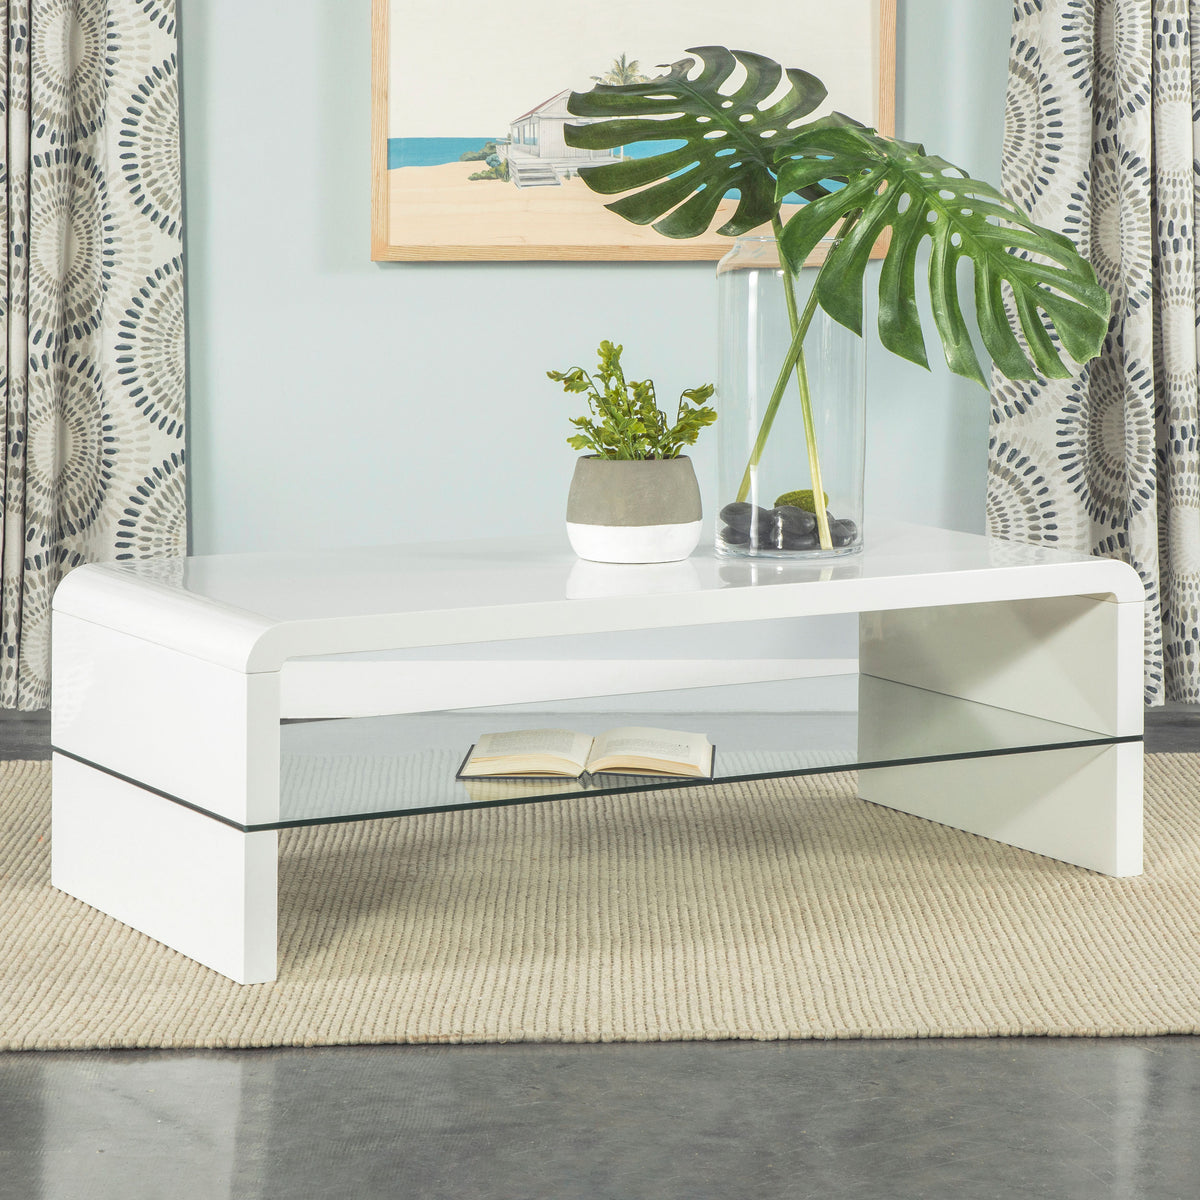 Airell Rectangular Coffee Table with Glass Shelf White High Gloss Airell Rectangular Coffee Table with Glass Shelf White High Gloss Half Price Furniture